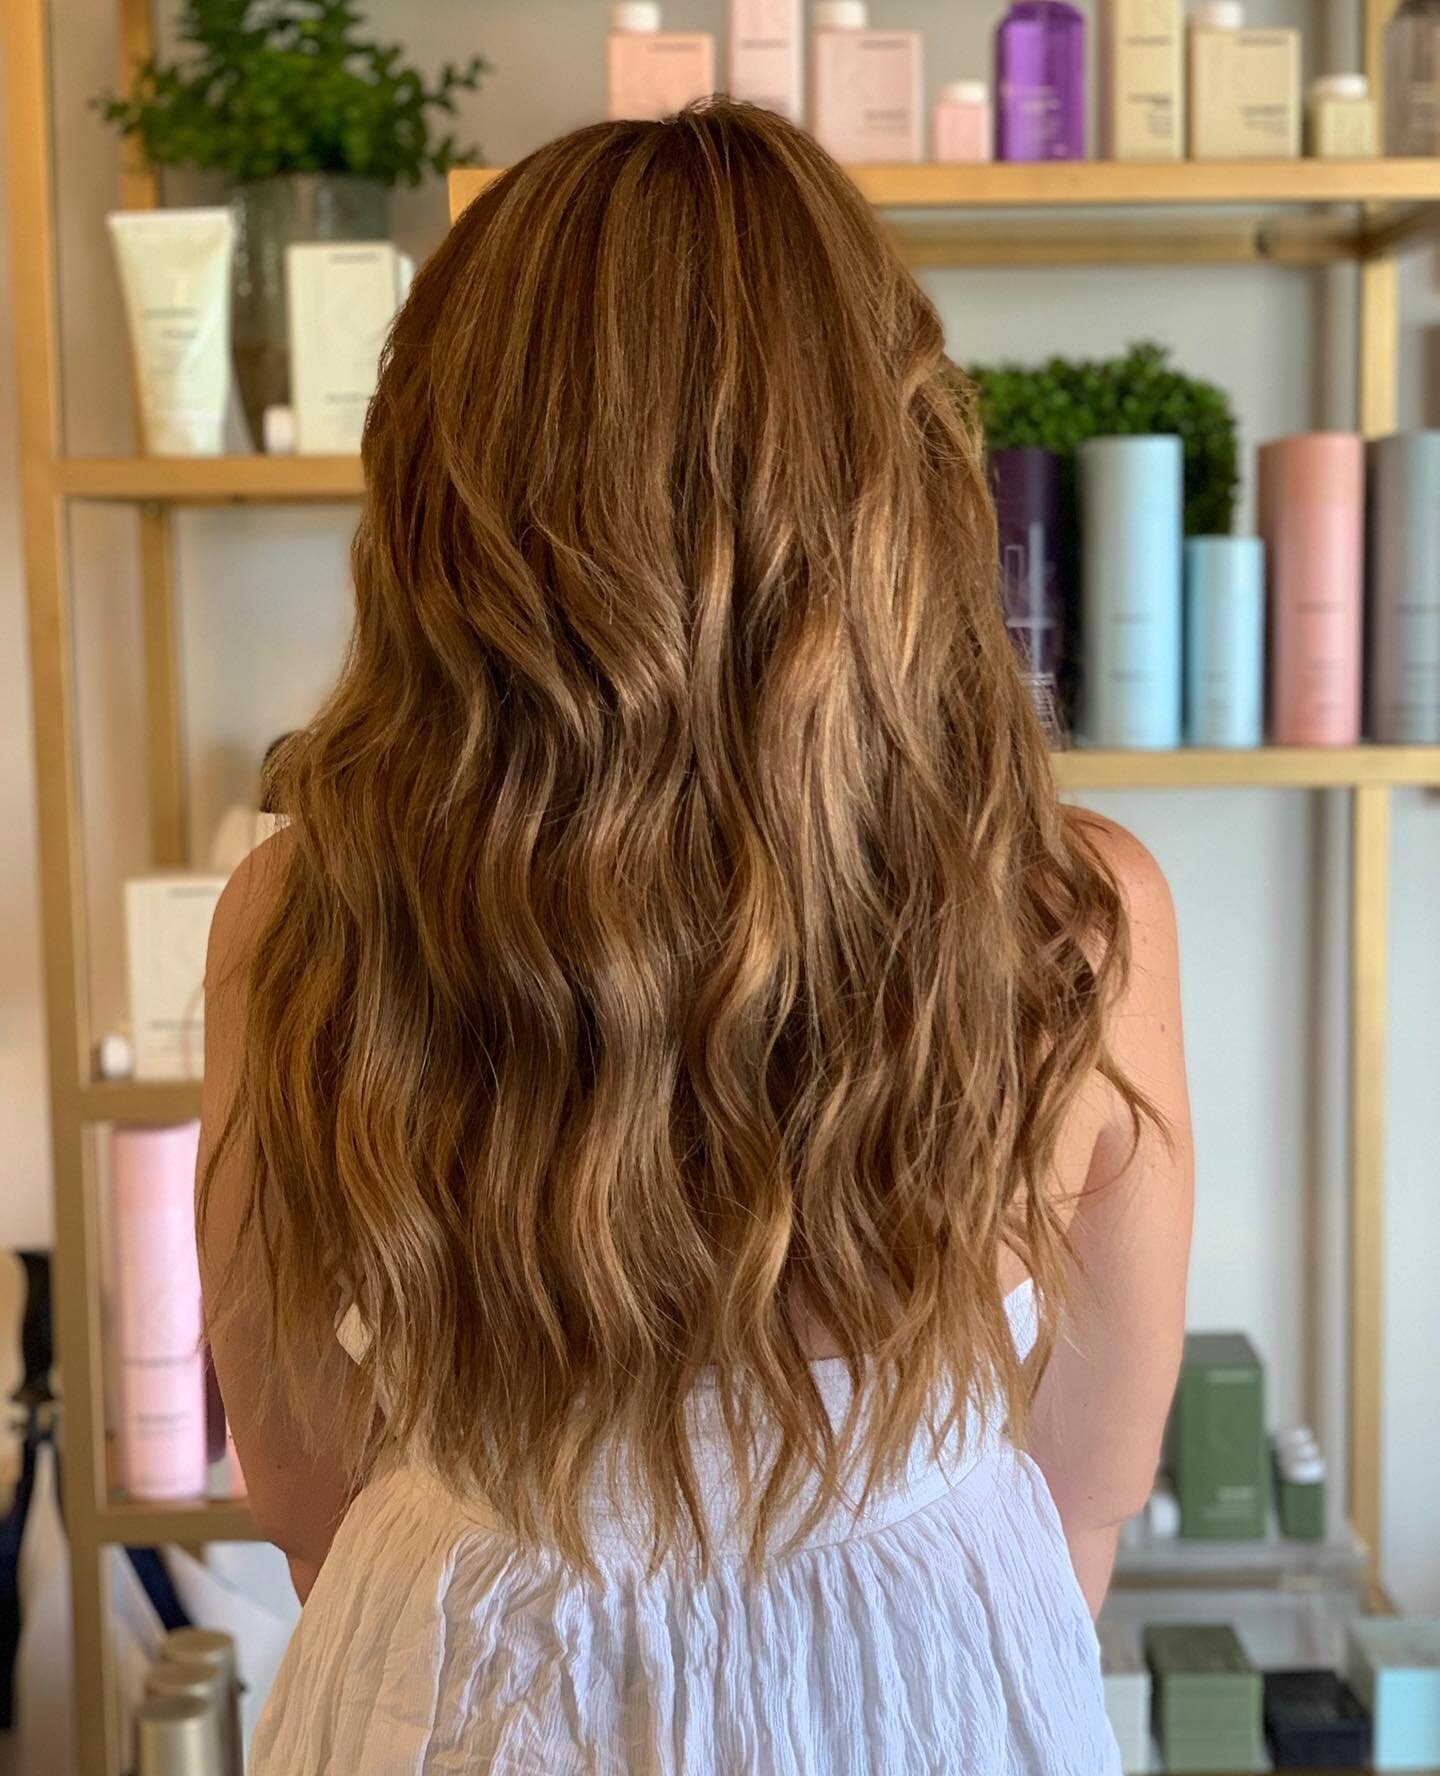 @invisiblebeadextensions create such amazing length and density! They are just one of the great options we have for clients looking to switch up or enhance their look. Book a consultation and we can explore what the best option is for you!